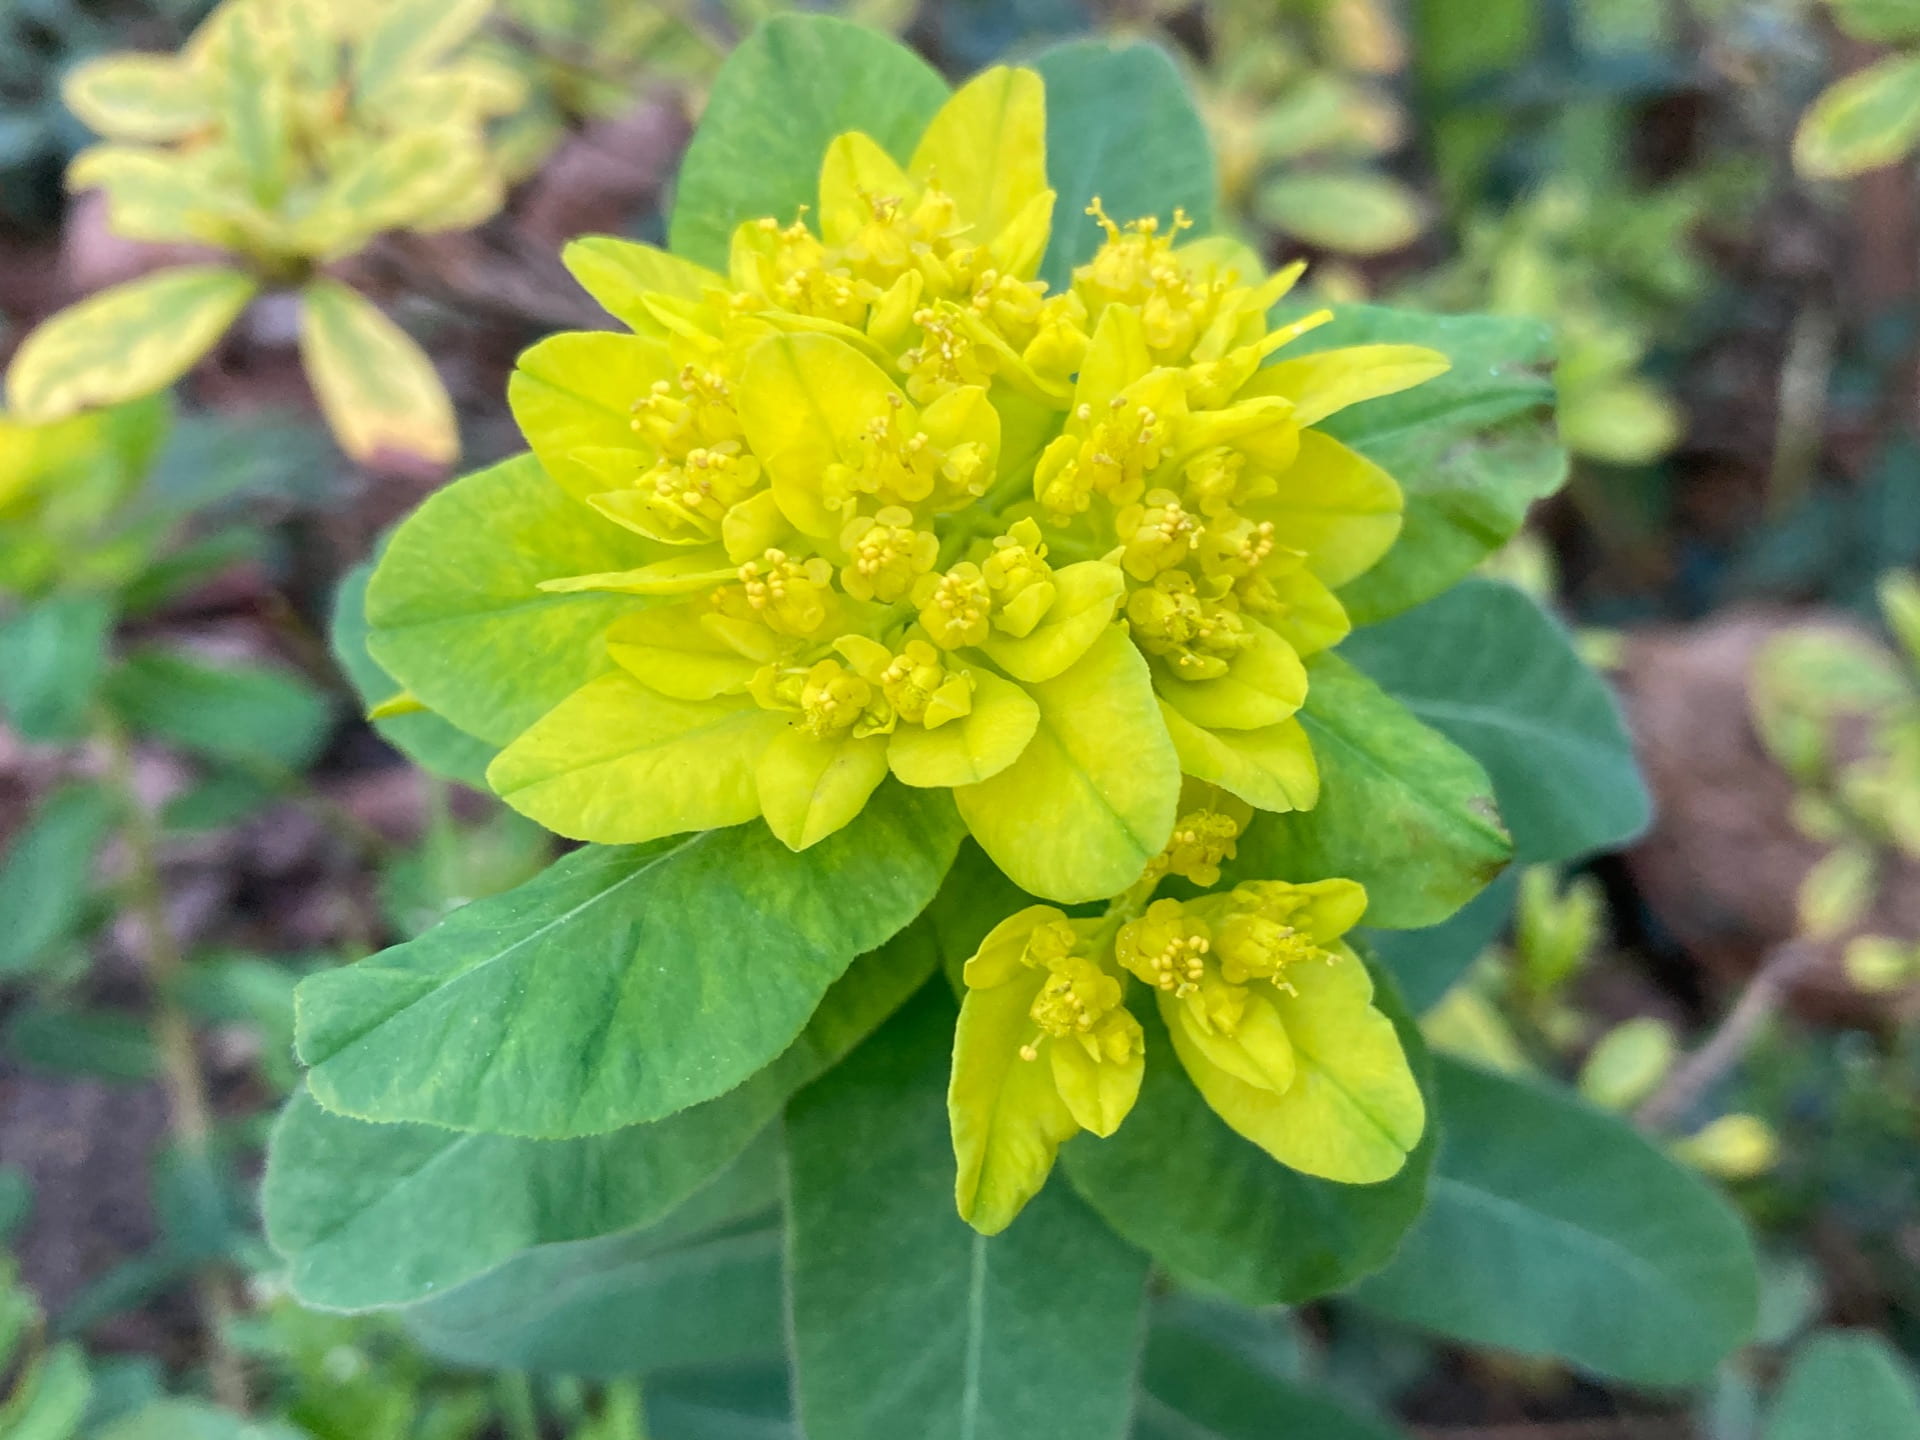 The acid yellow flowers of Euphorbia polychroma typify the fresh colors of the season.